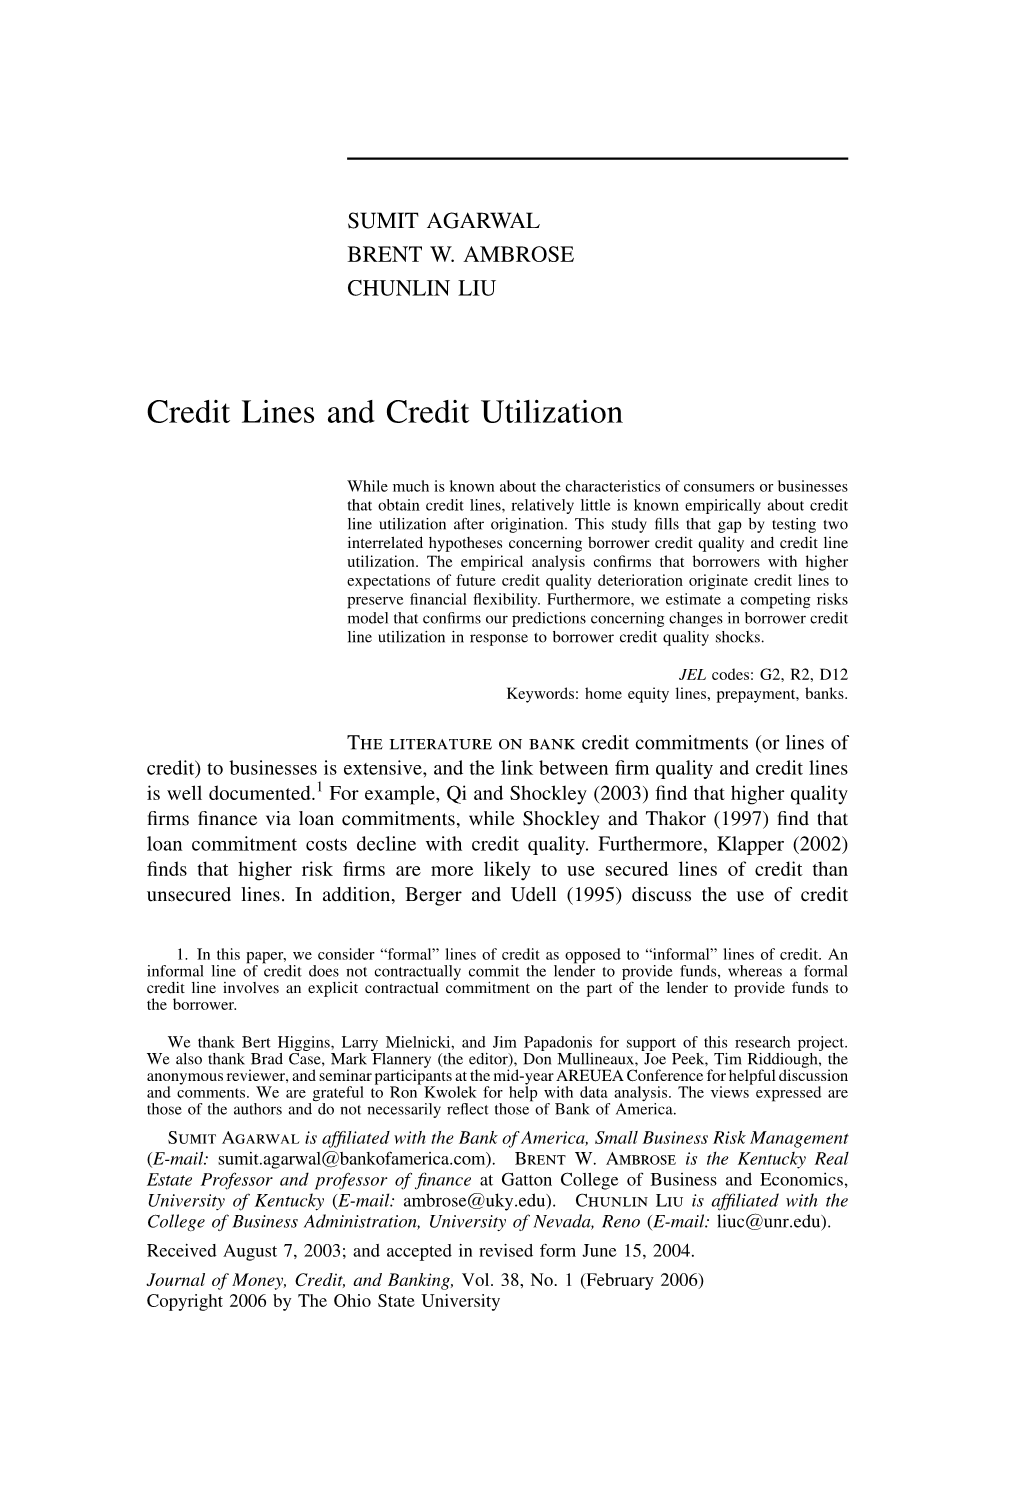 Credit Lines and Credit Utilization